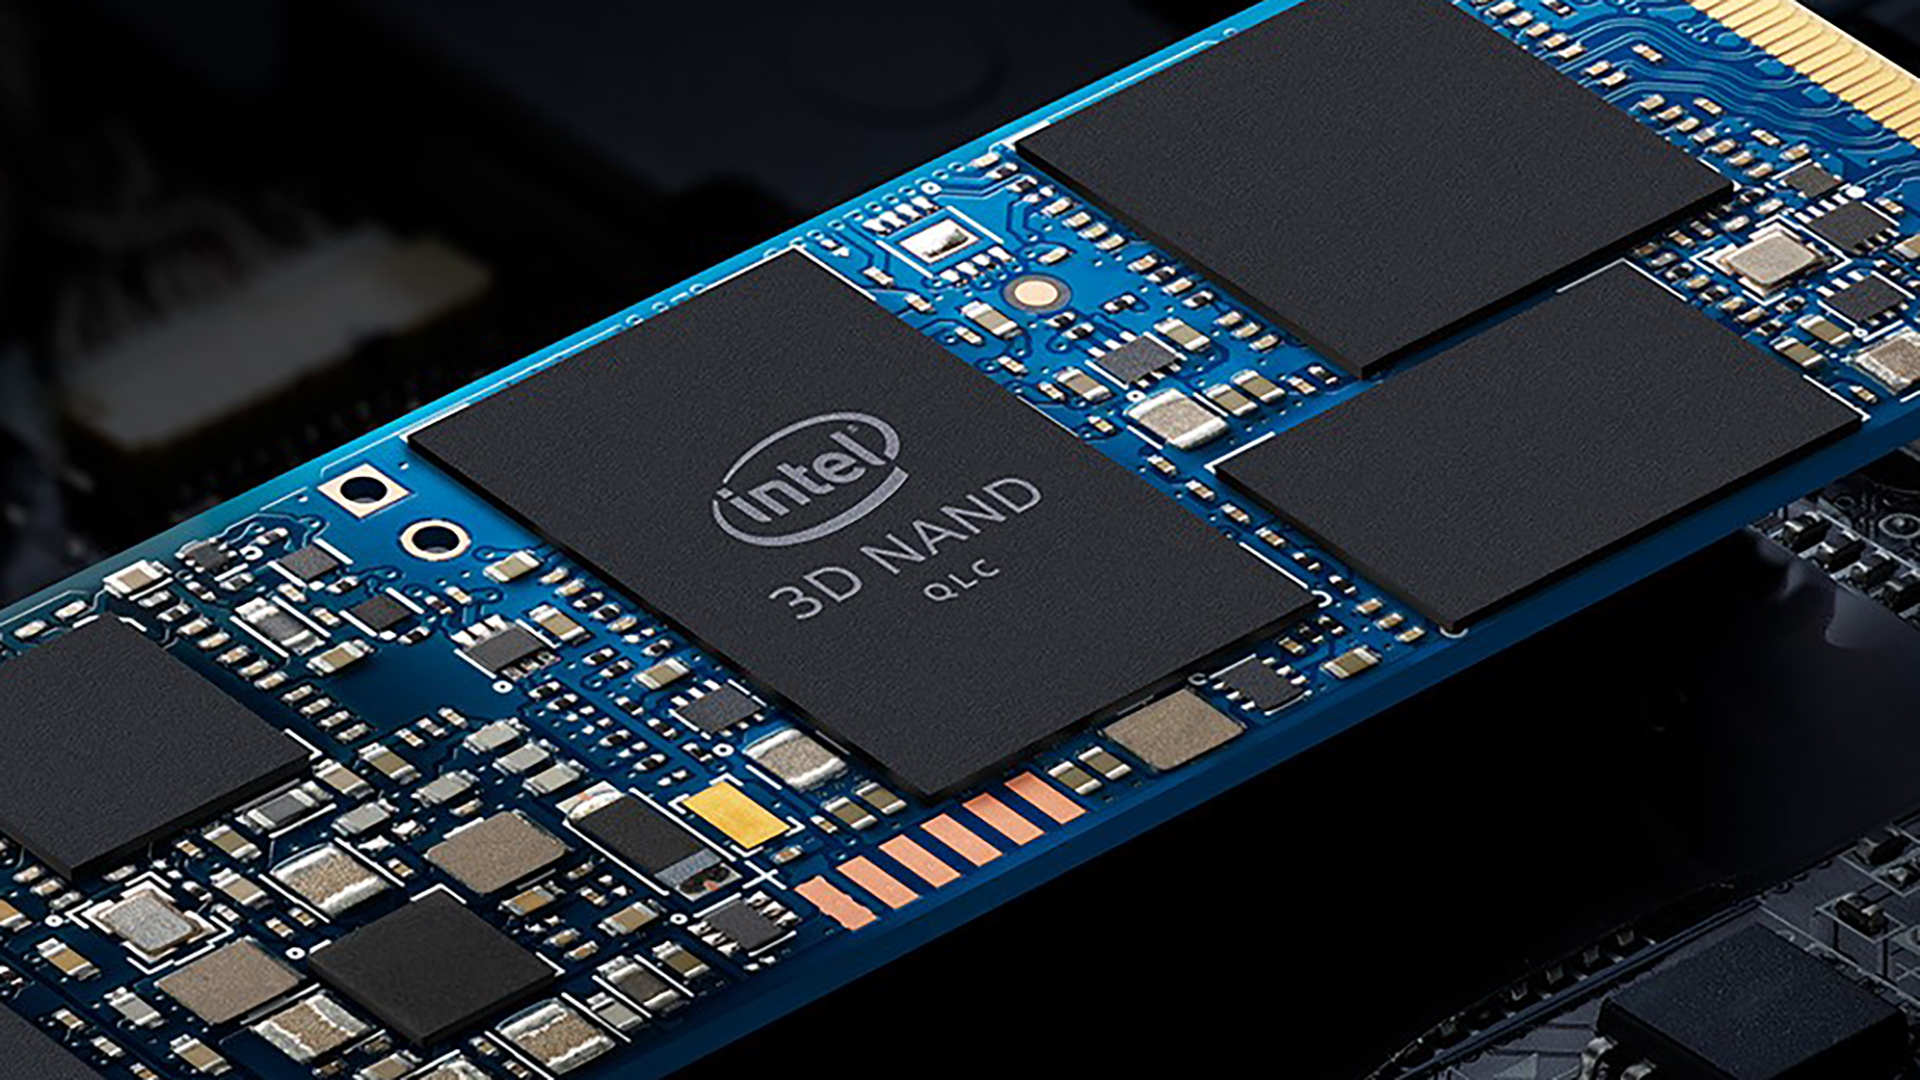  Intel sells off its SSD and memory business to SK Hynix in drawn-out $9bn deal 